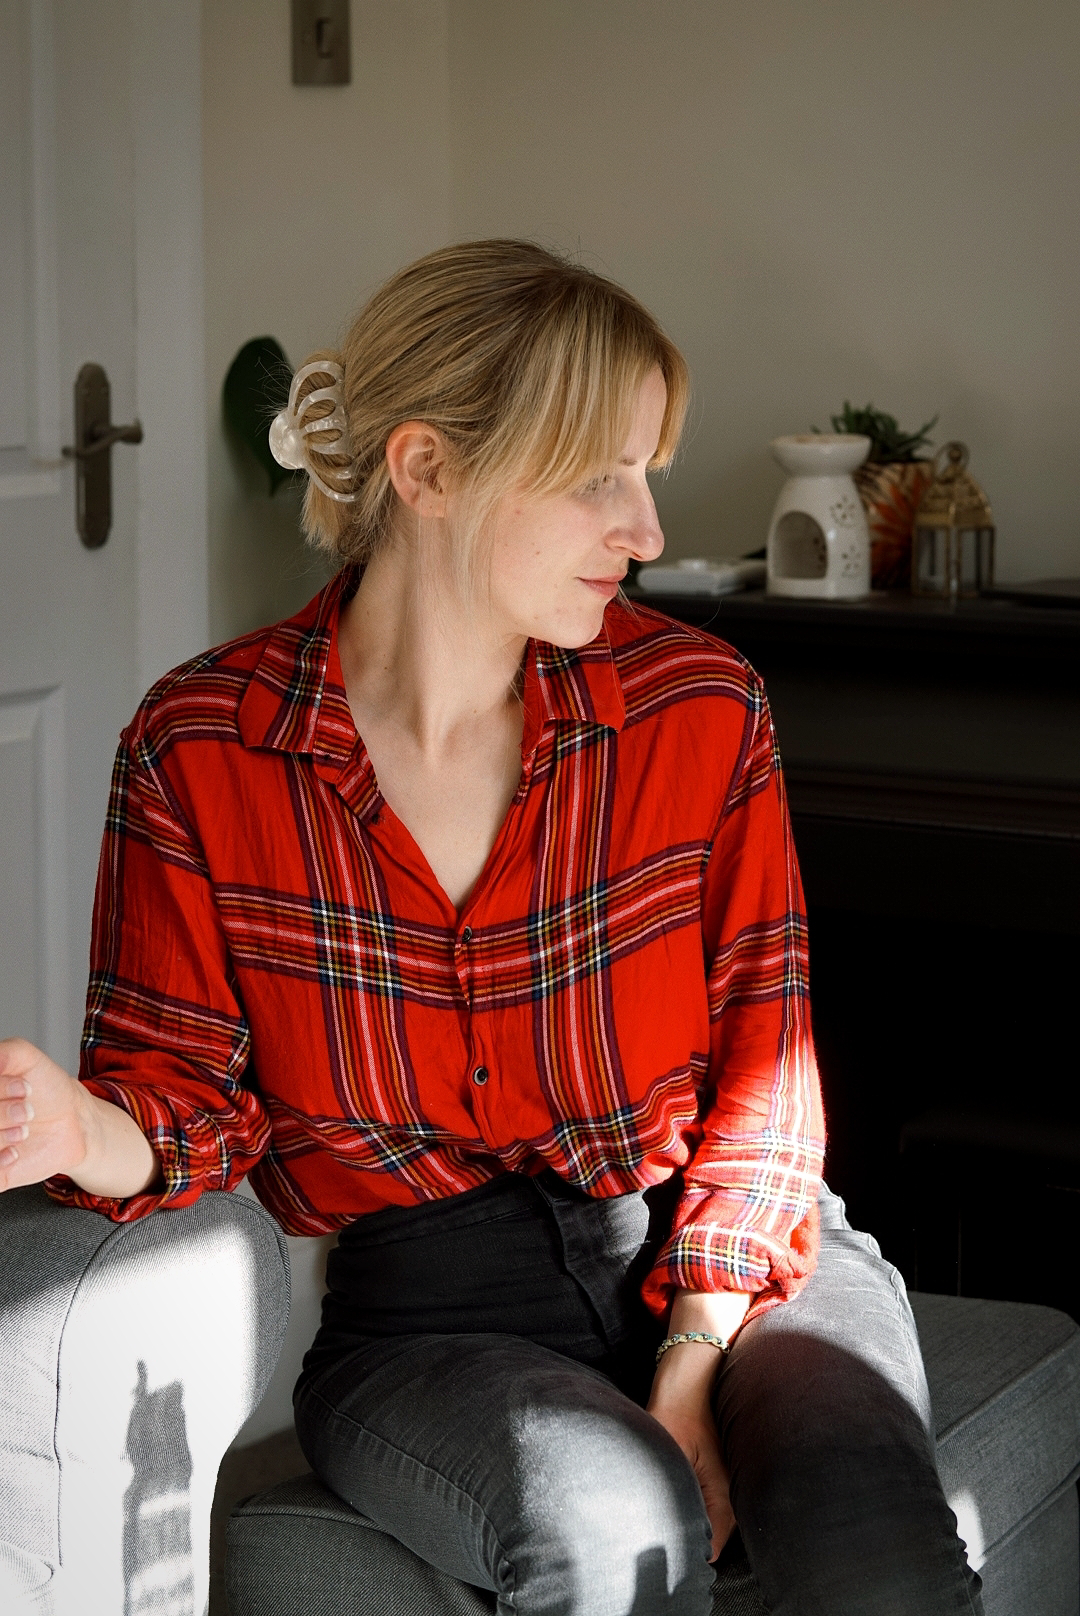 Amy is sitting down wearing a red tartan shirt tucked into black denim skinny jeans.